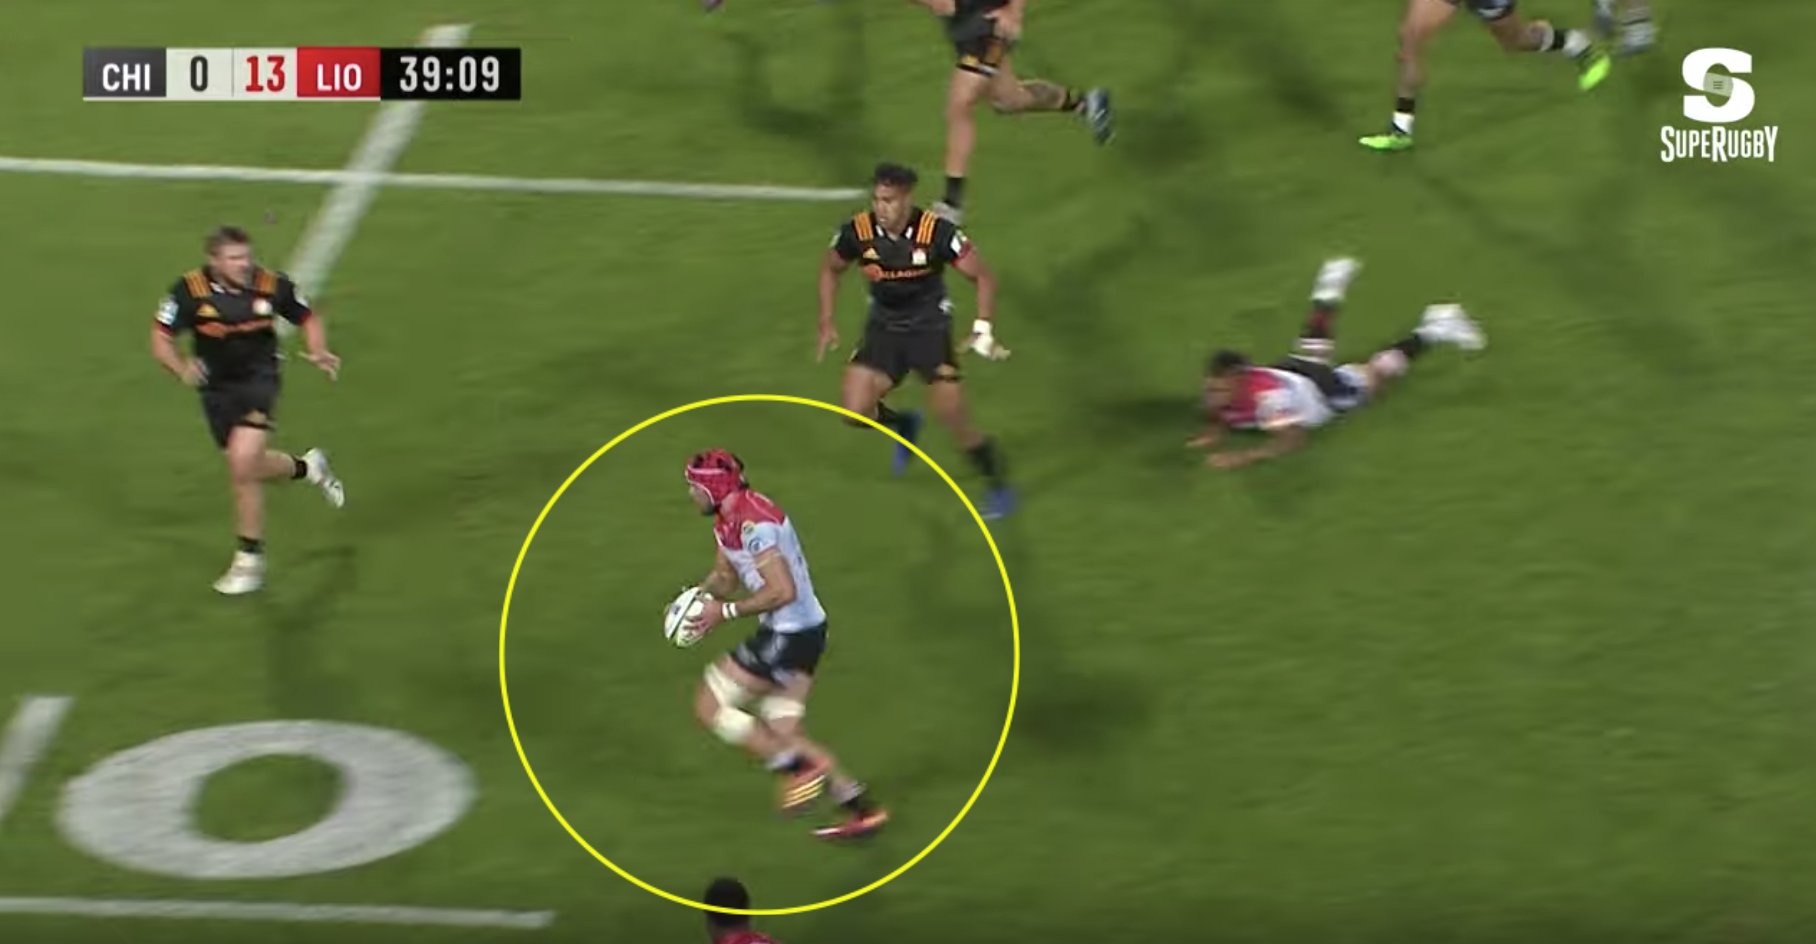 WATCH: Warren Whiteley proves he is still South Africa's Messiah with outrageous skill that no forward should be able to use